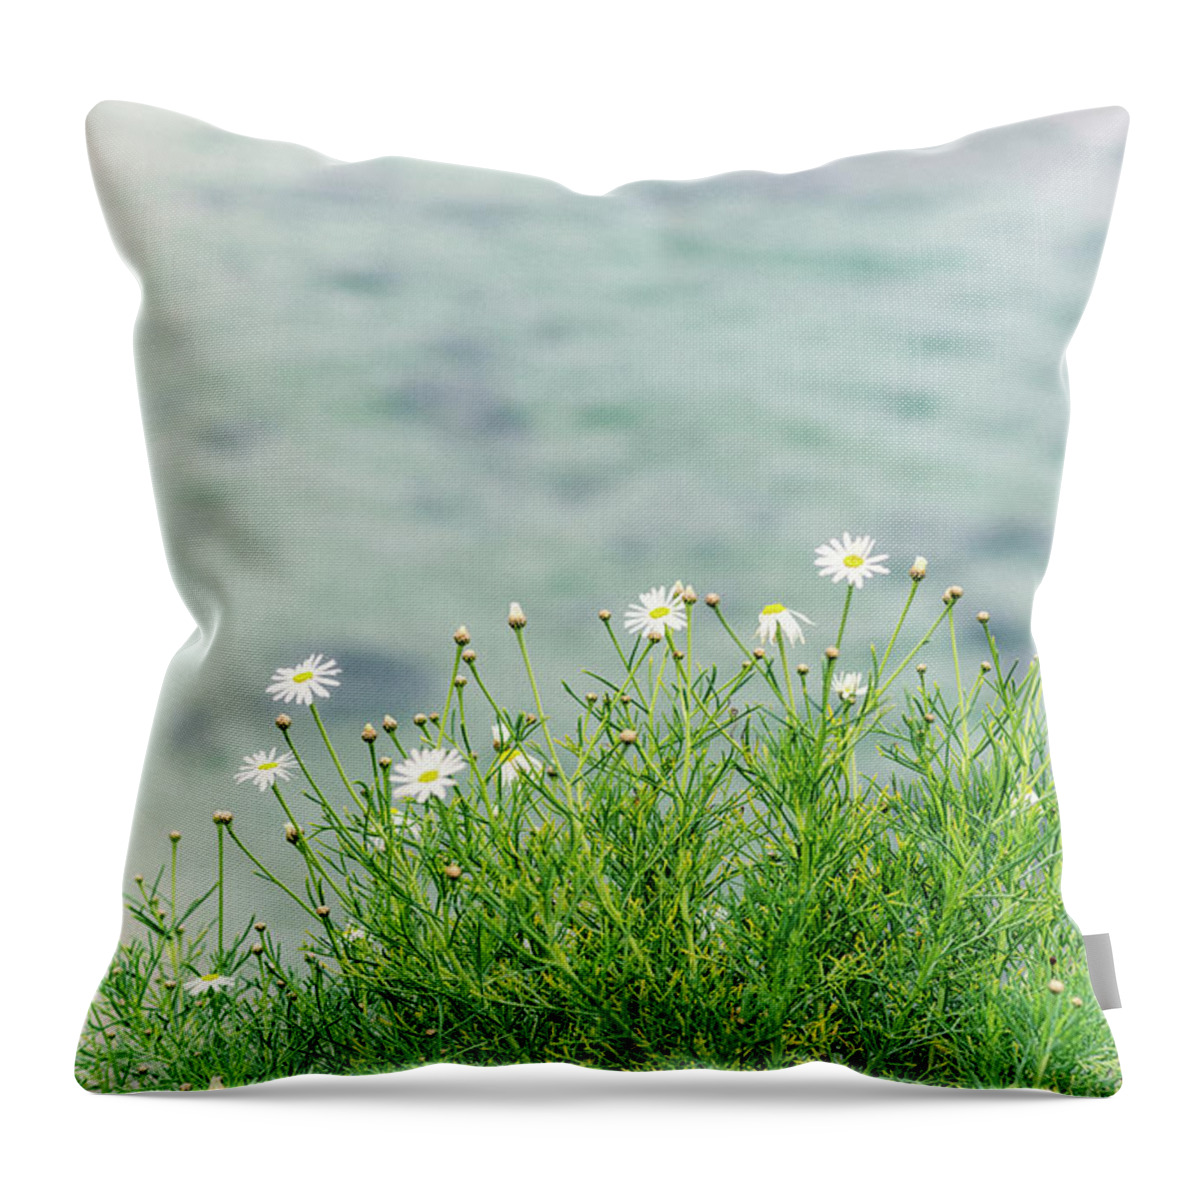 Daisy Throw Pillow featuring the photograph Dainty Daisies Vintage by Joseph S Giacalone